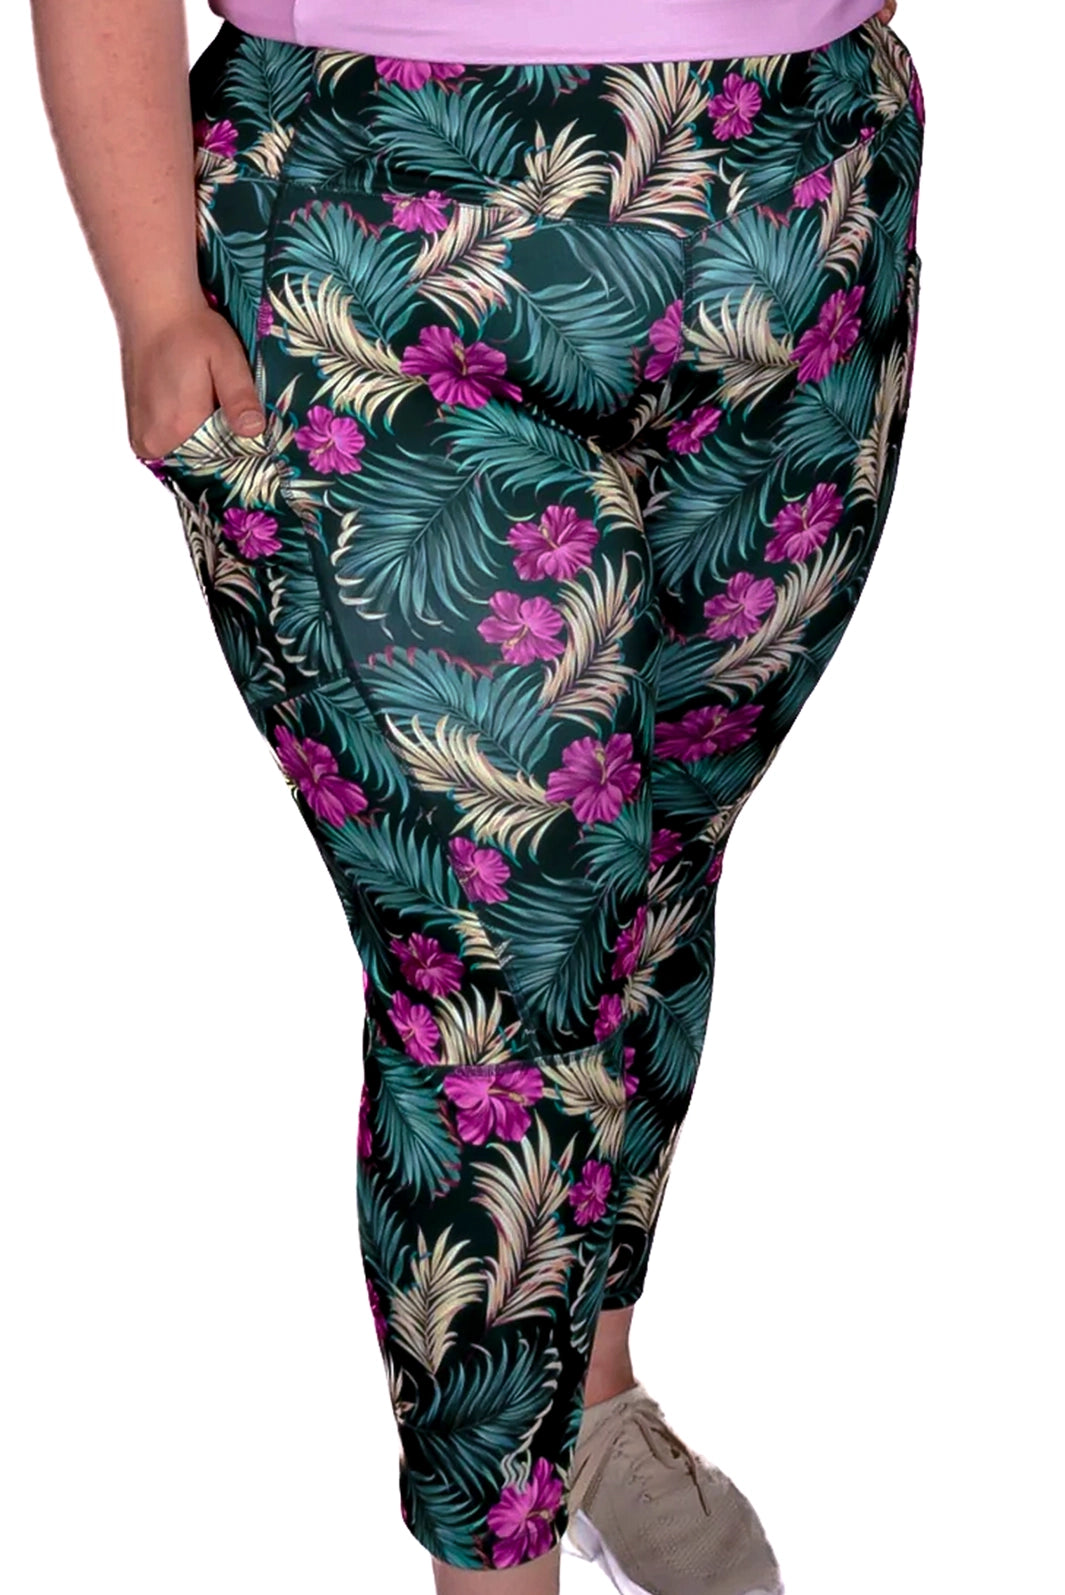 Plus Size Novation Printed Leggings With Pocket by Sportive Plus